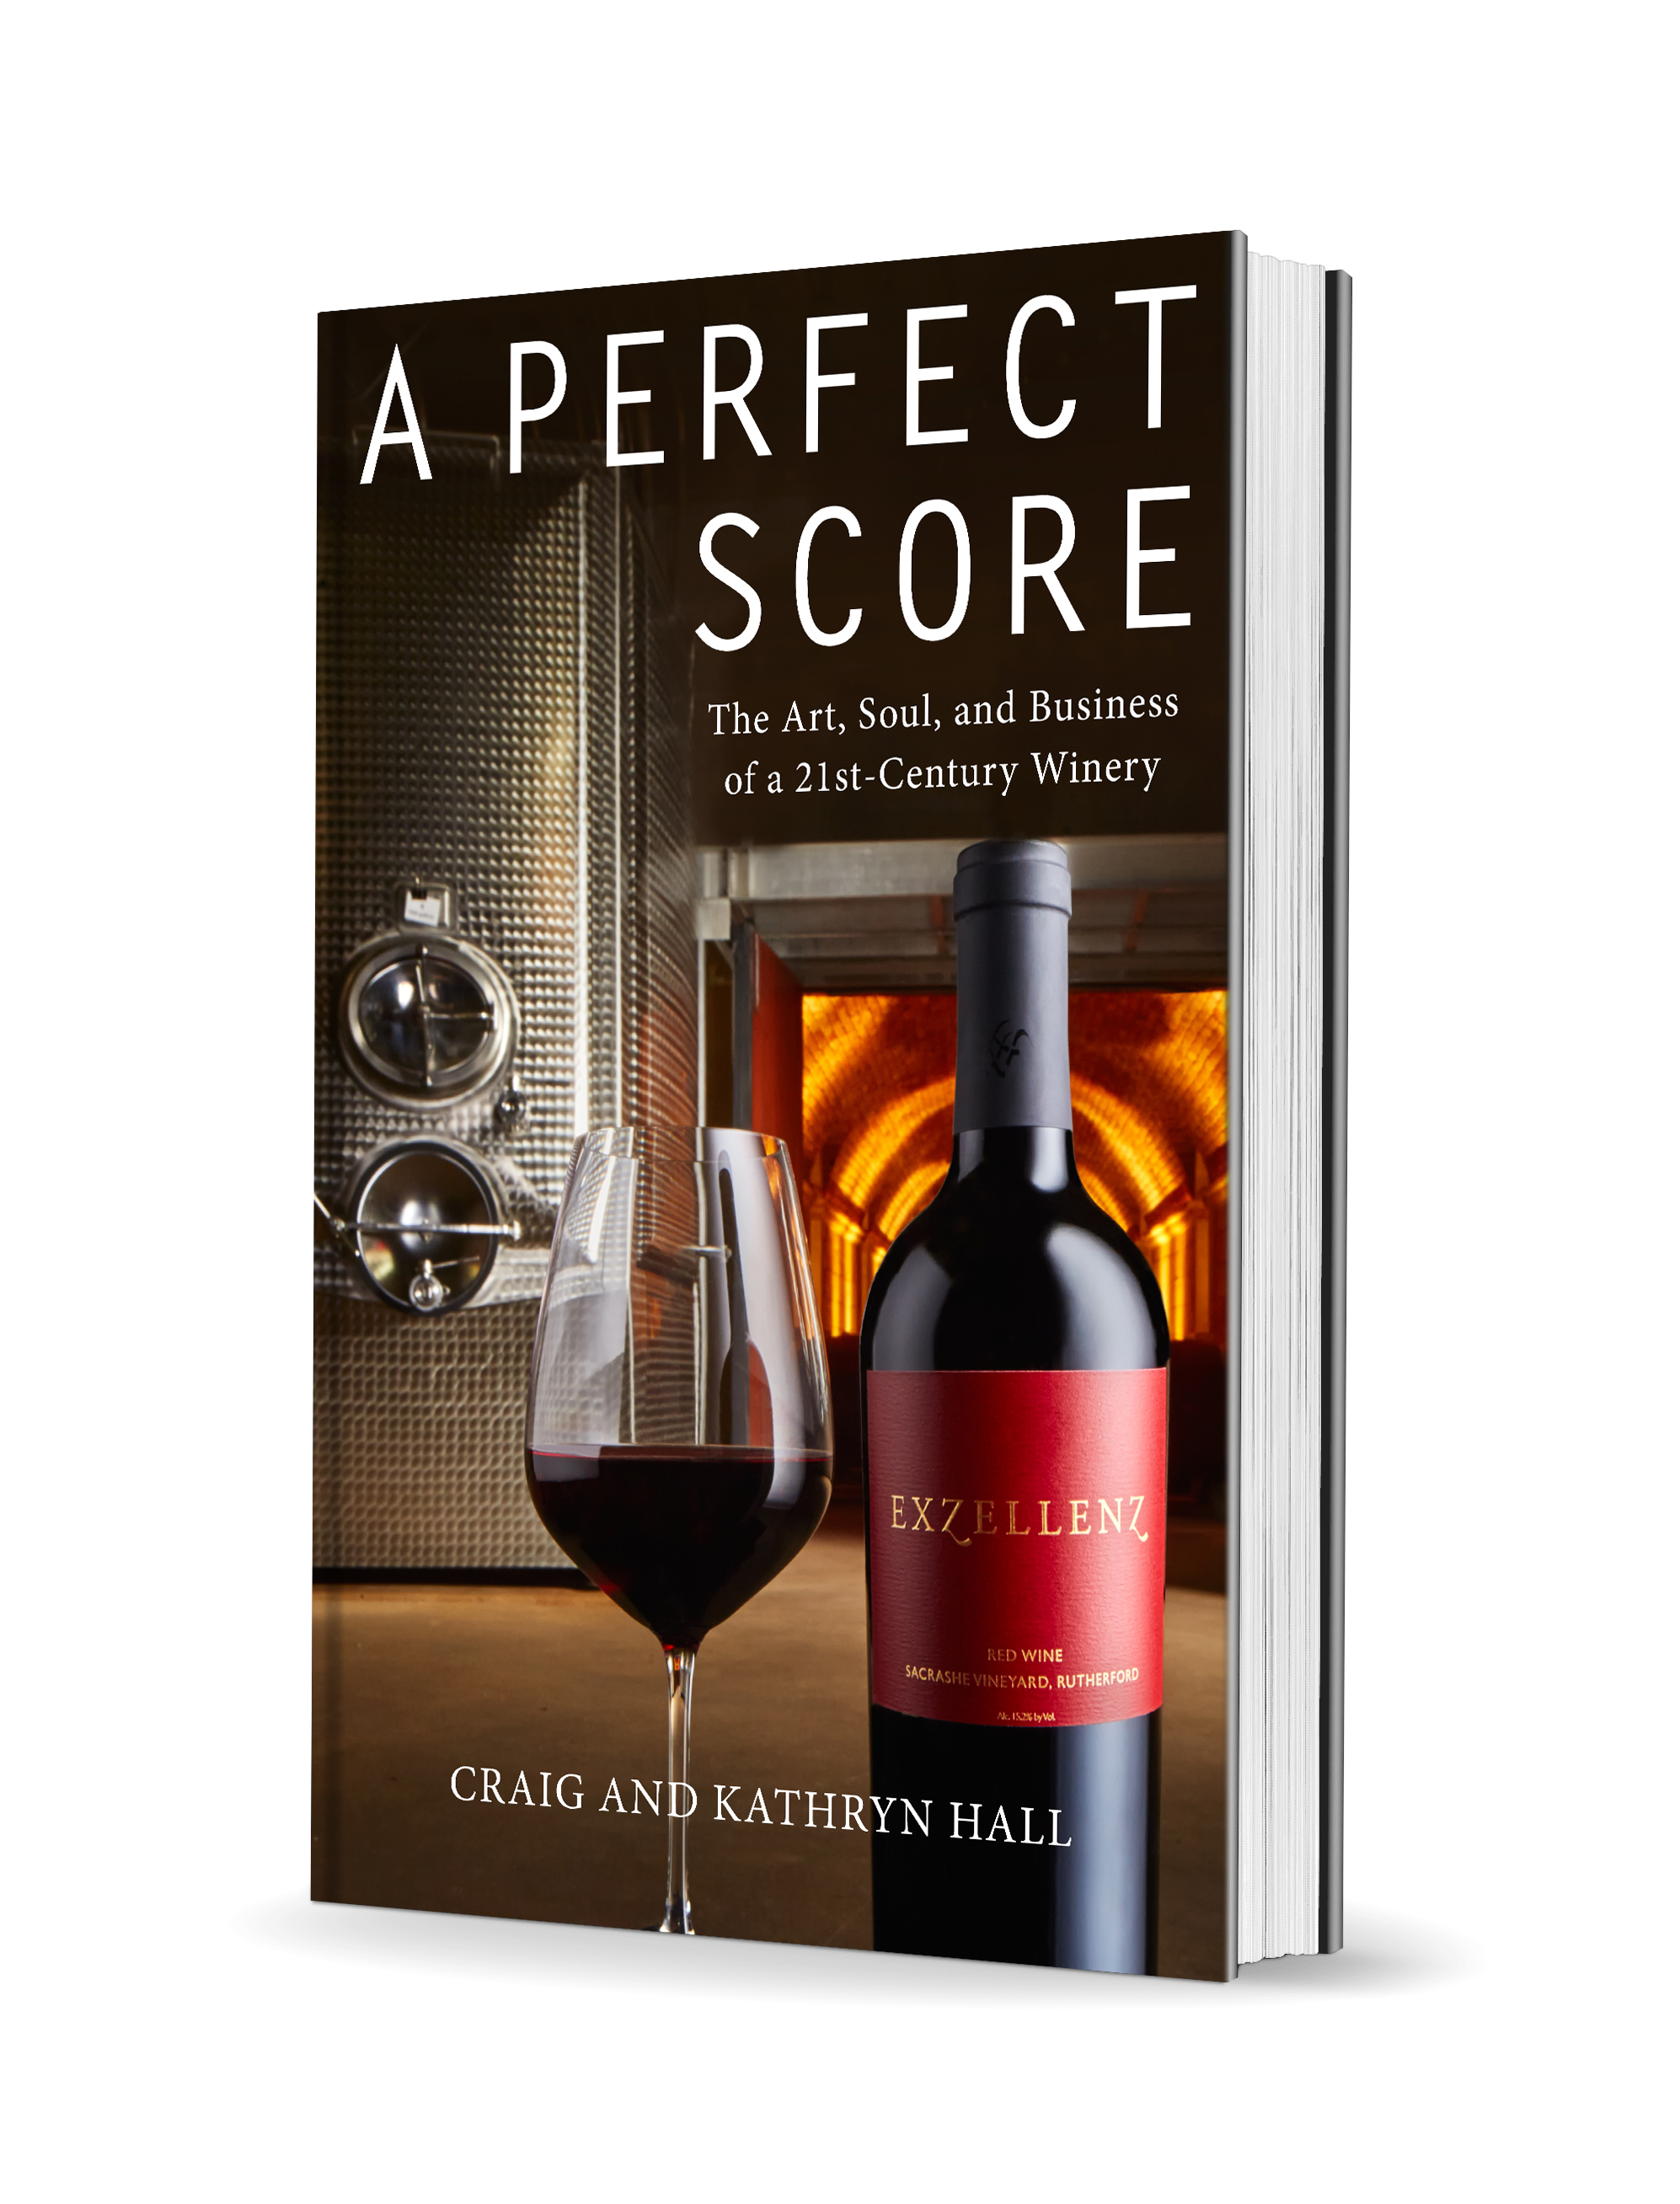 “A Perfect Score” Book Review